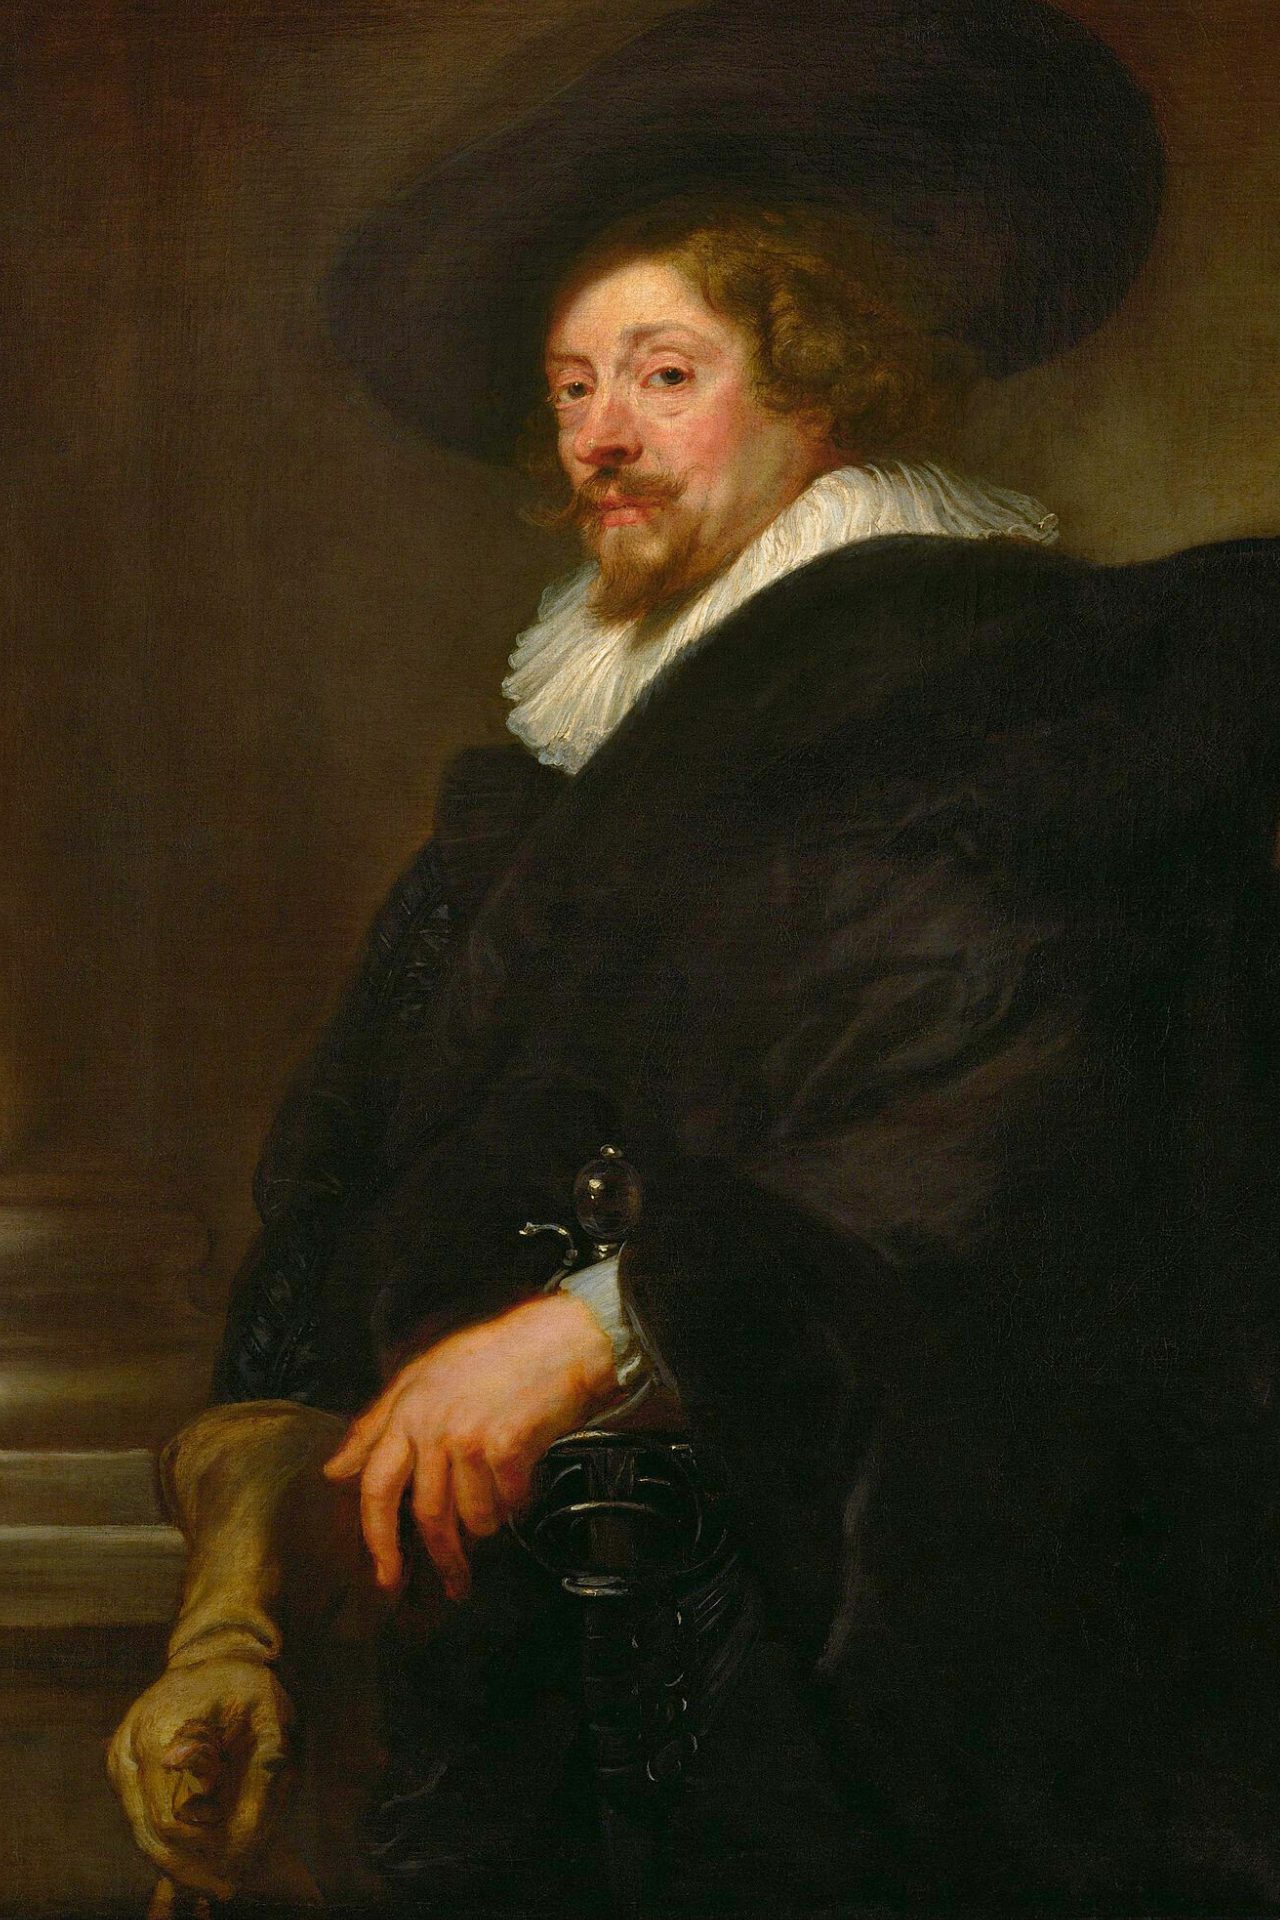 Self-portrait of Peter Paul Rubens as an older man, featuring elements of courtly portraits such as a column, sword, and glove, while placing emphasis on his distinct facial features. He is dressed in black attire with a white collar.